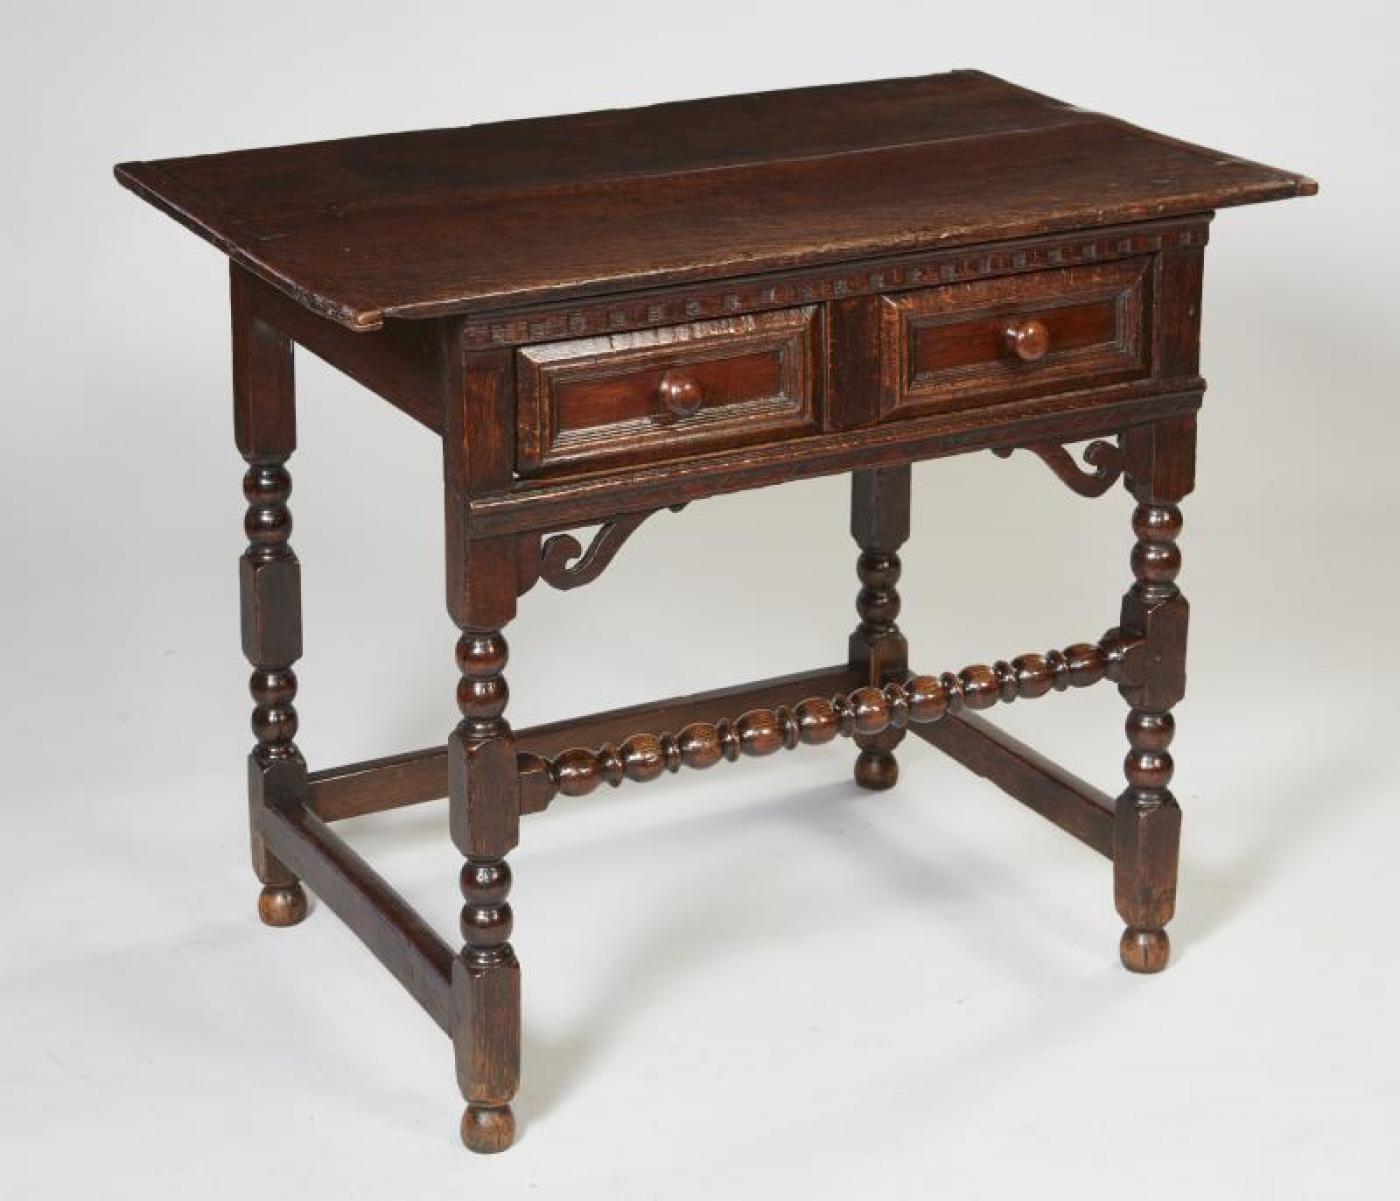 Very fine Charles II period English oak side table, the two plank top with breadboard ends over dentil molded frieze over single drawer with geometric molding and later turned yewwood pulls, over cross hatched support with pierced spandel brackets,